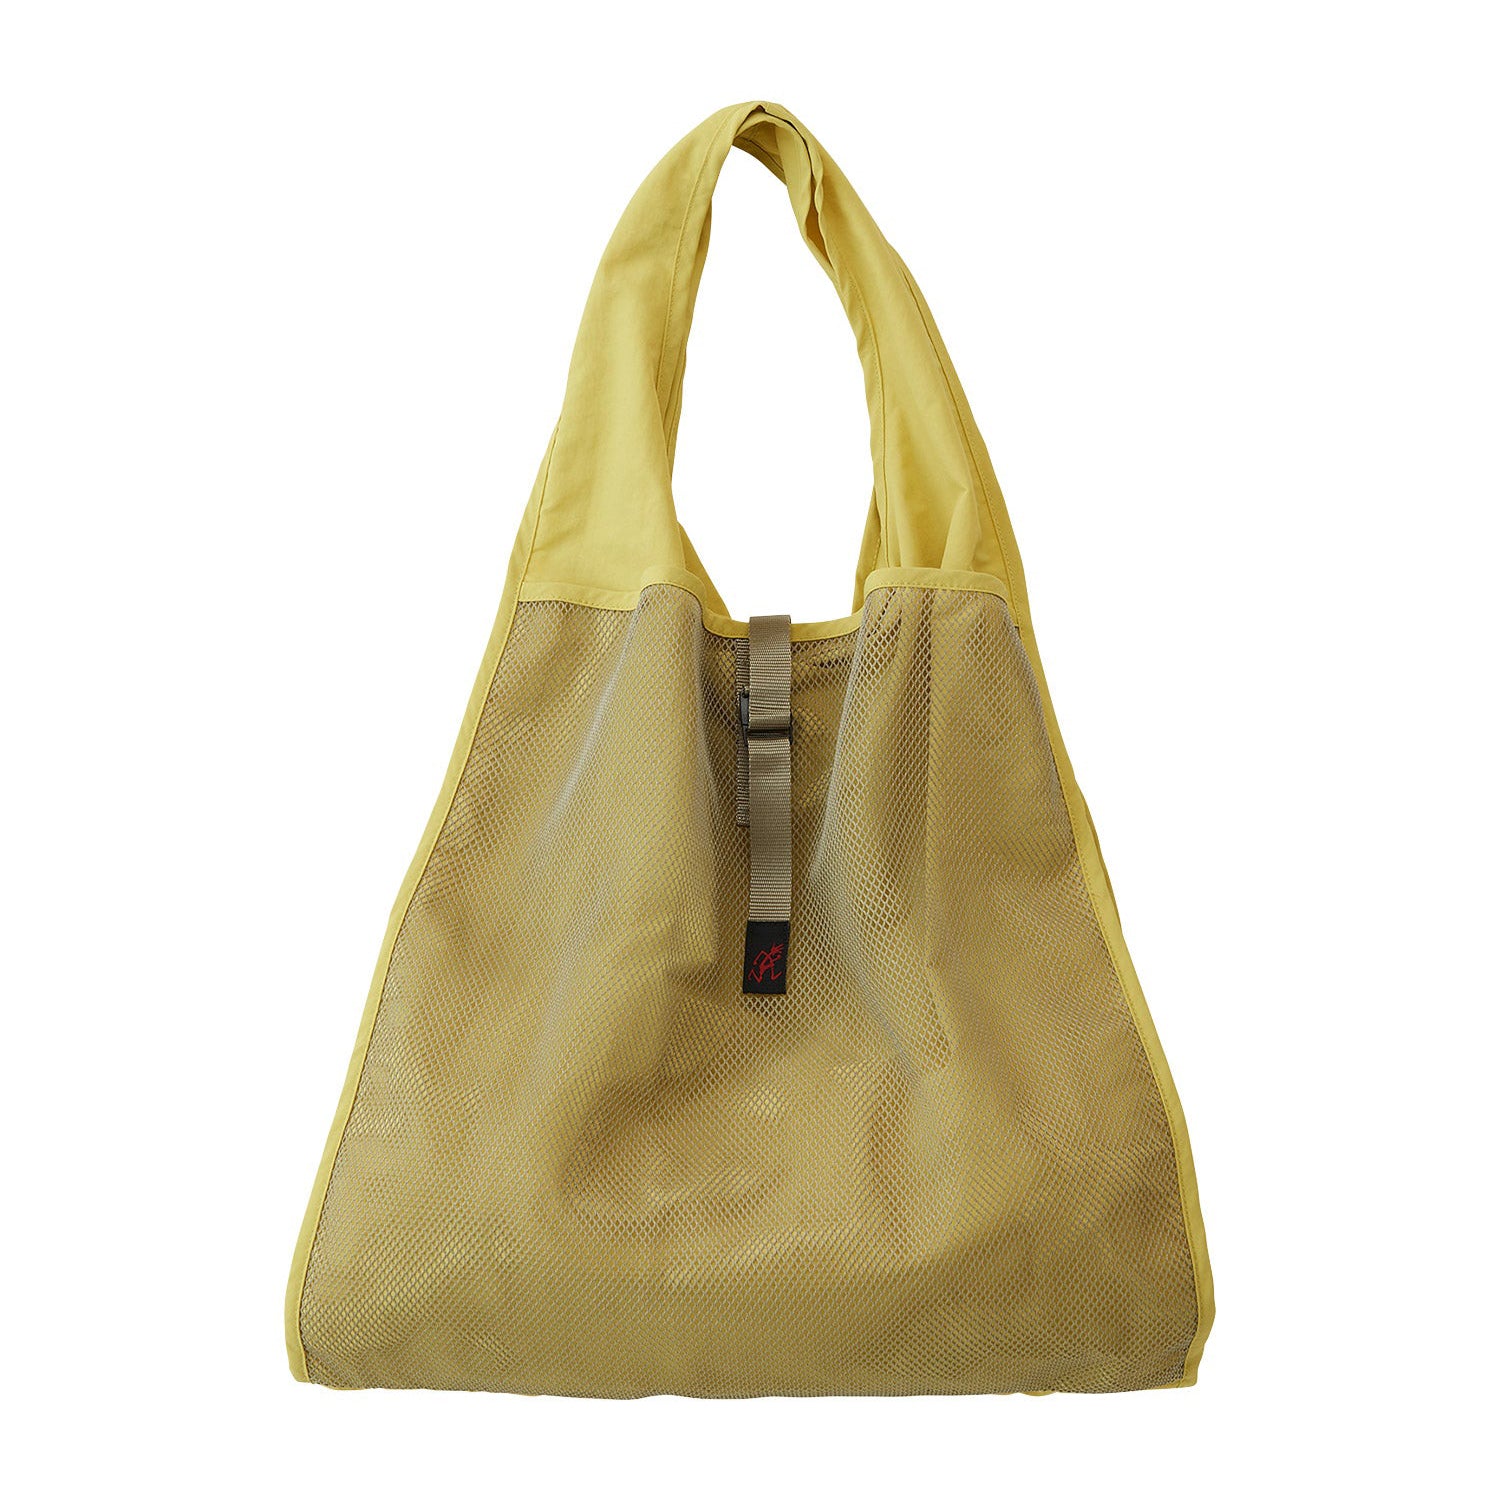 DAILY BAG CANARY YELLOW